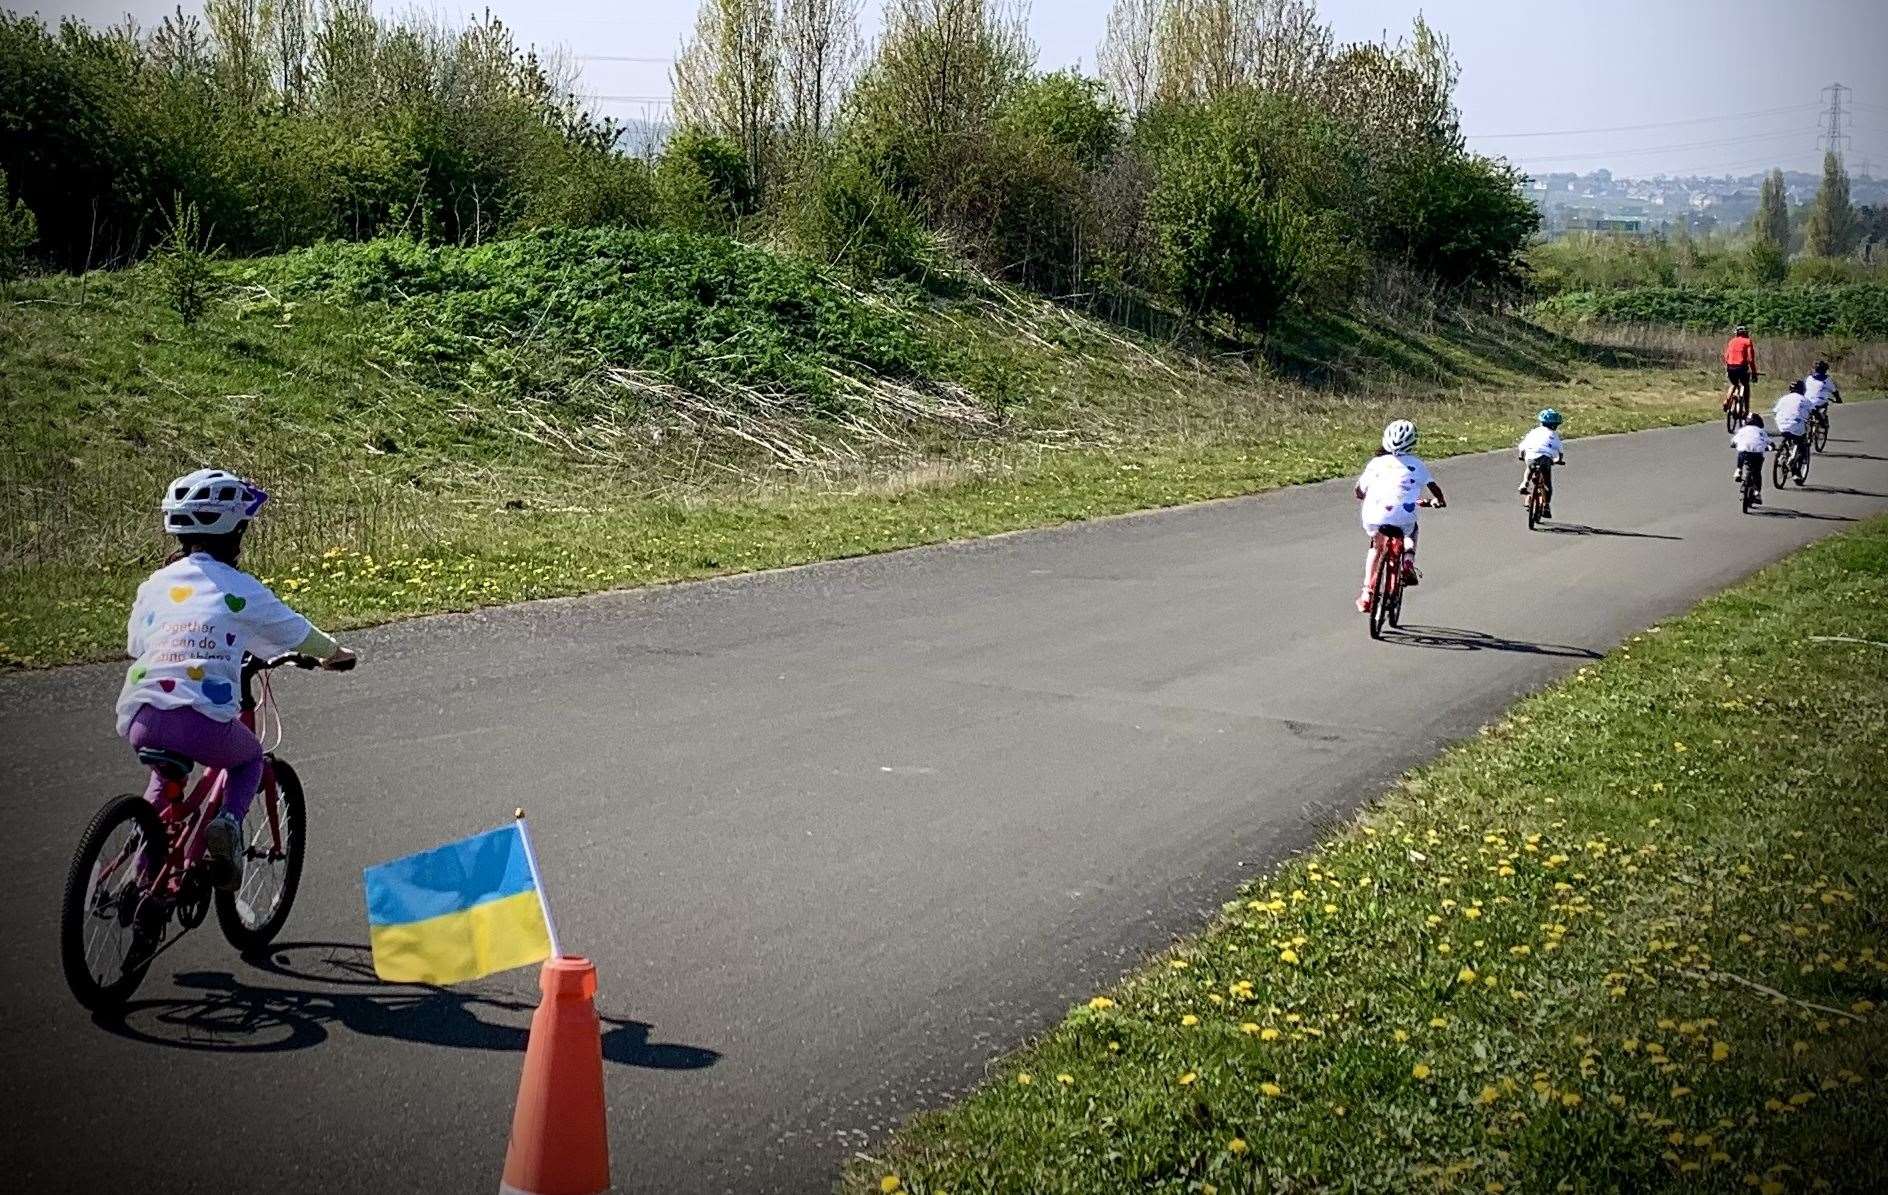 The bike ride took place at the Gravesend Cyclopark